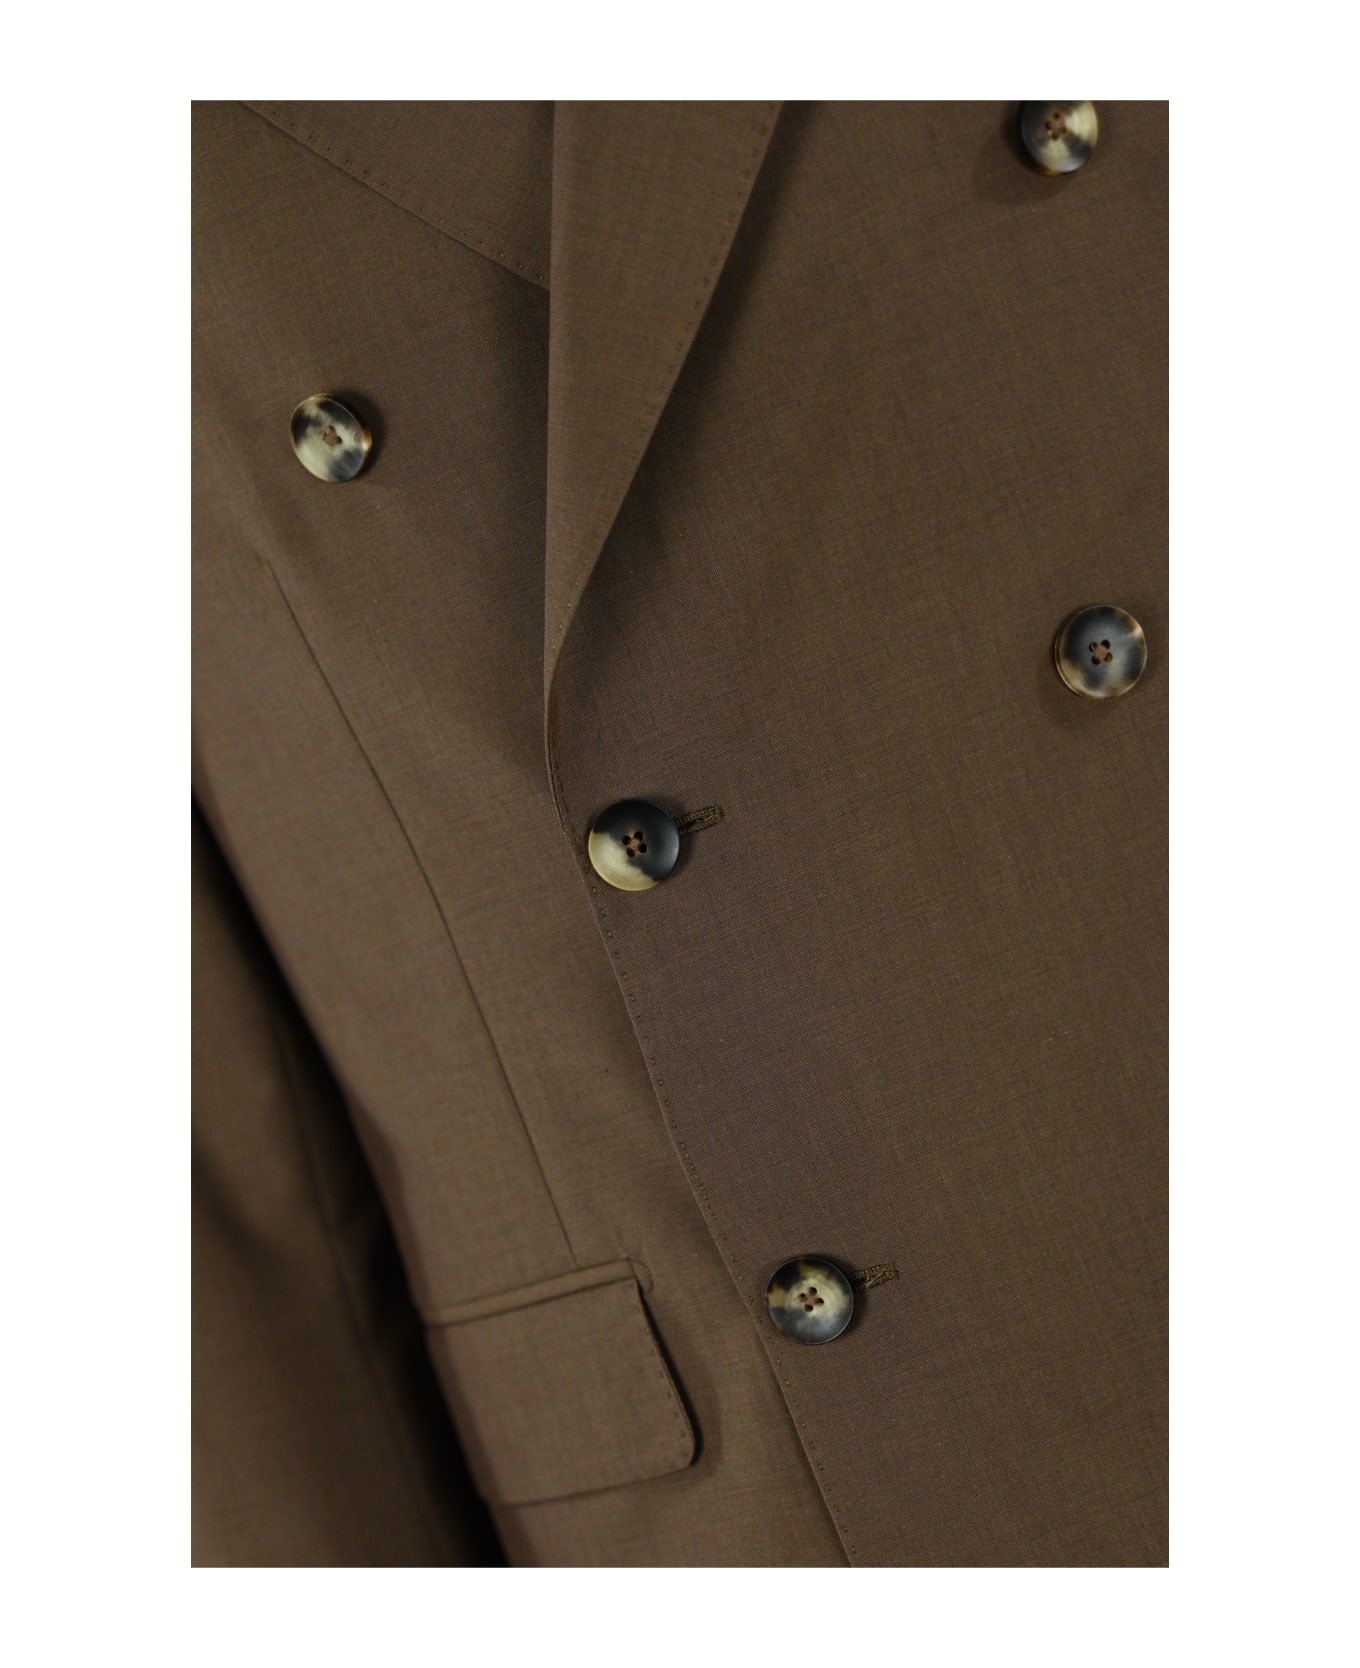 Lardini Double-breasted Suit In Wool And Cotton - Tabacco